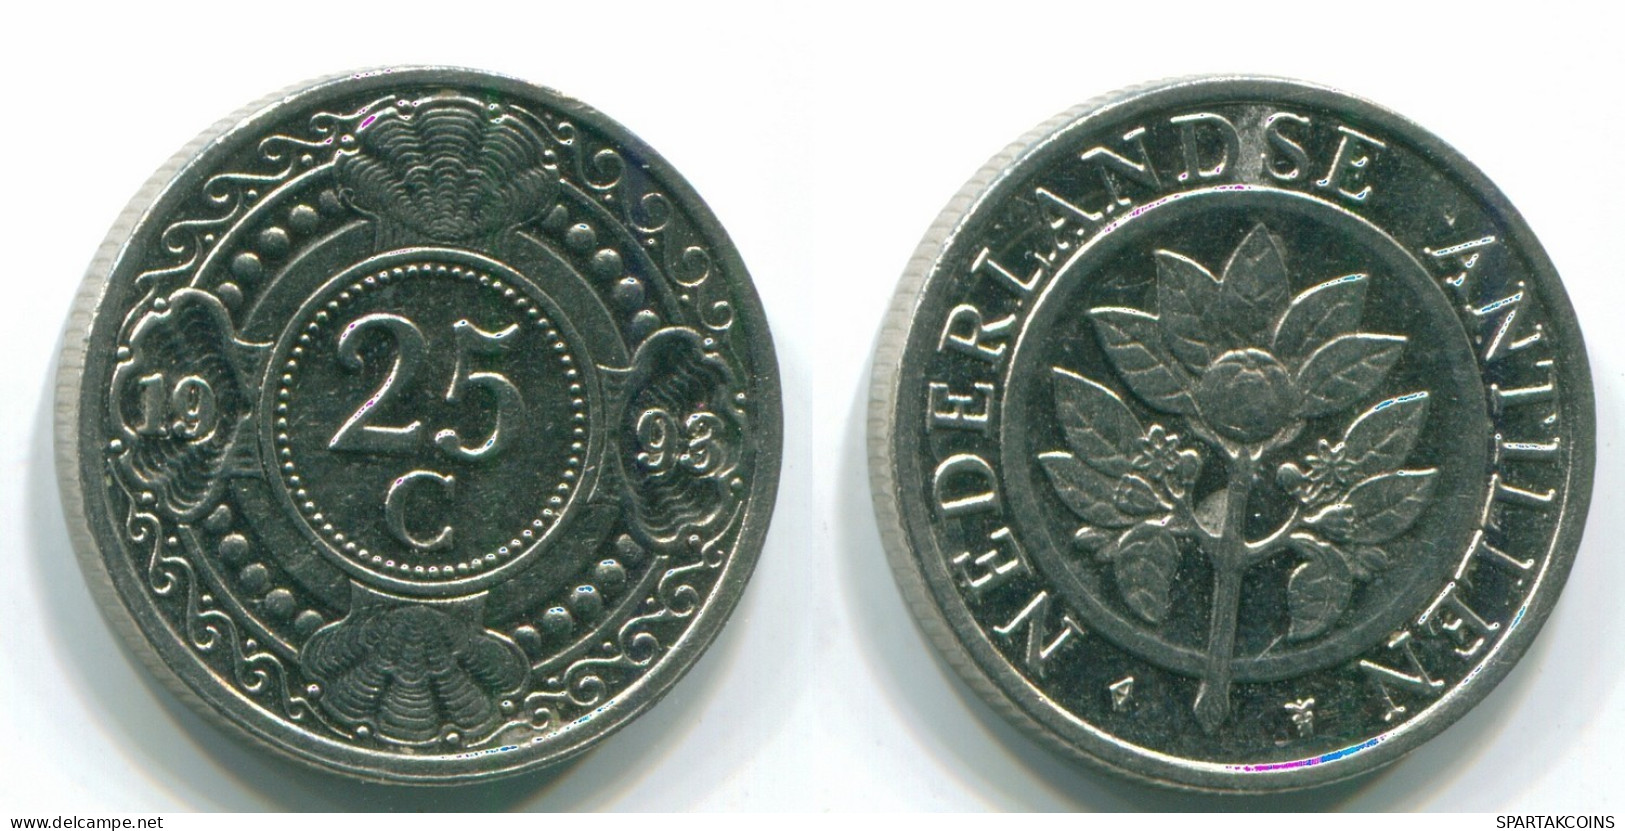 25 CENTS 1993 NETHERLANDS ANTILLES Nickel Colonial Coin #S11291.U.A - Netherlands Antilles